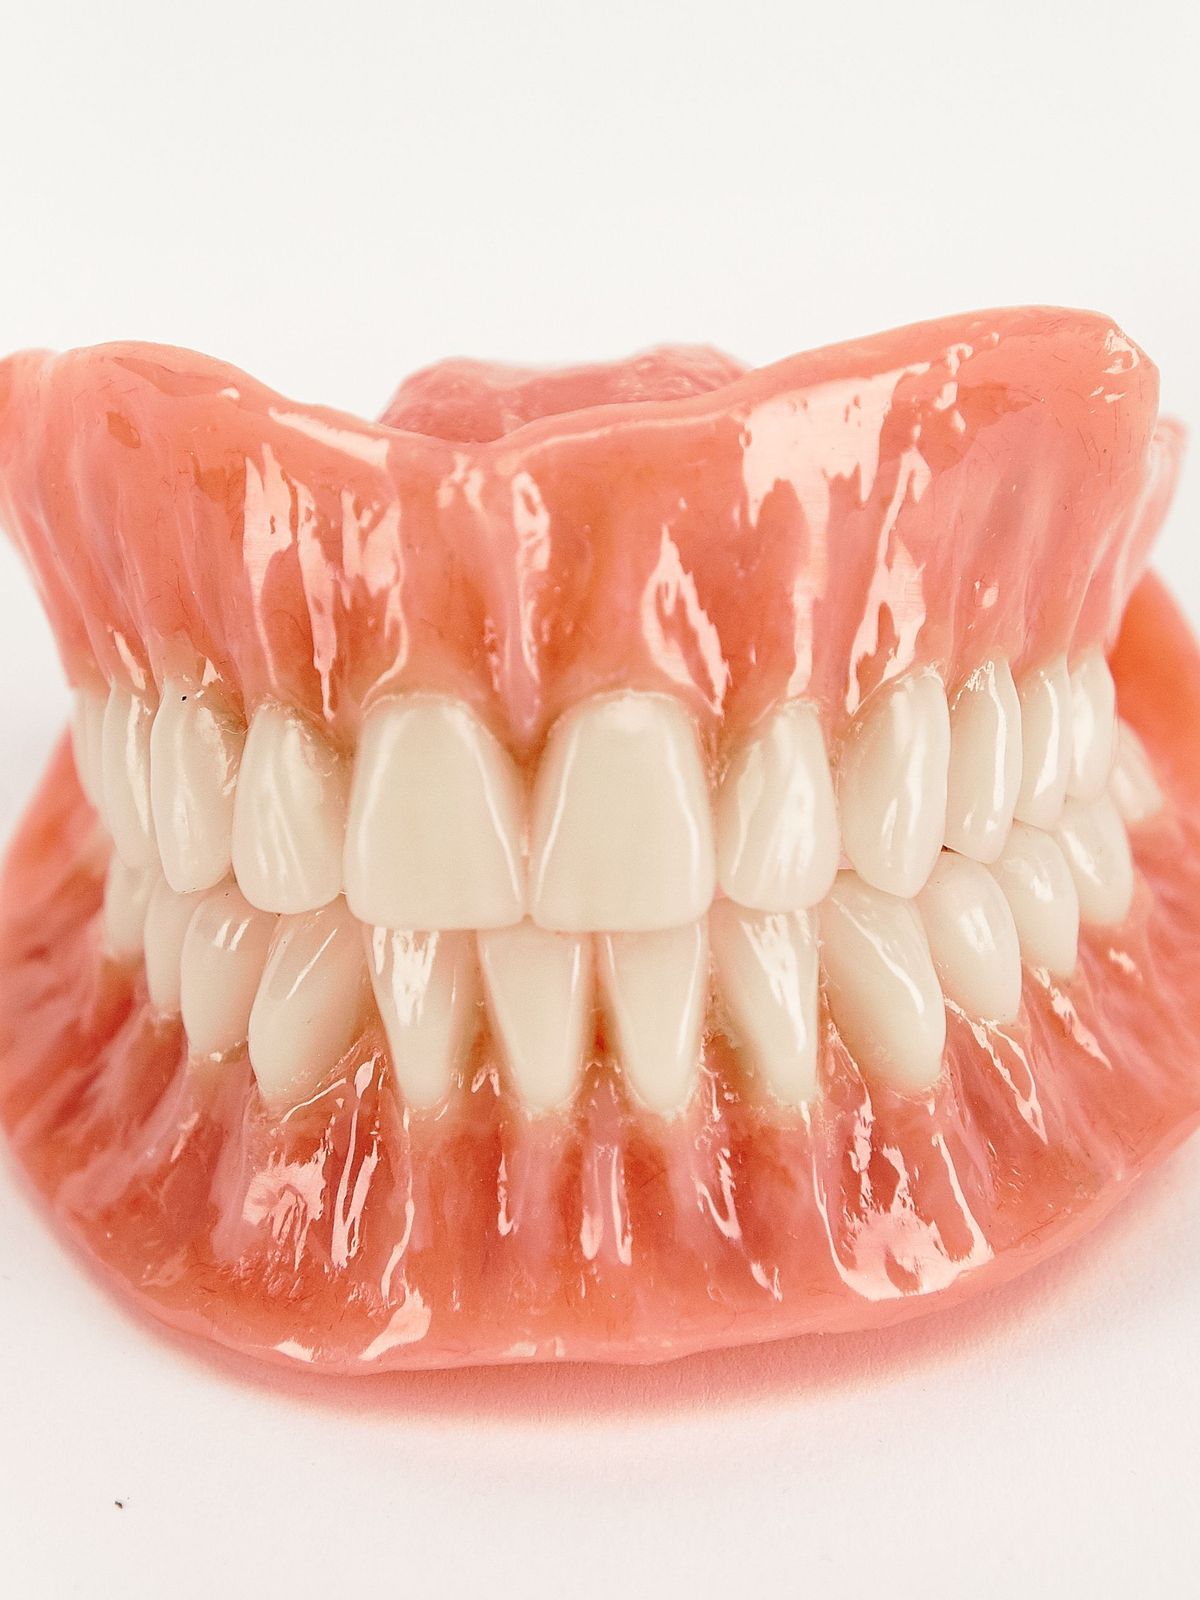 Complete Denture featured image